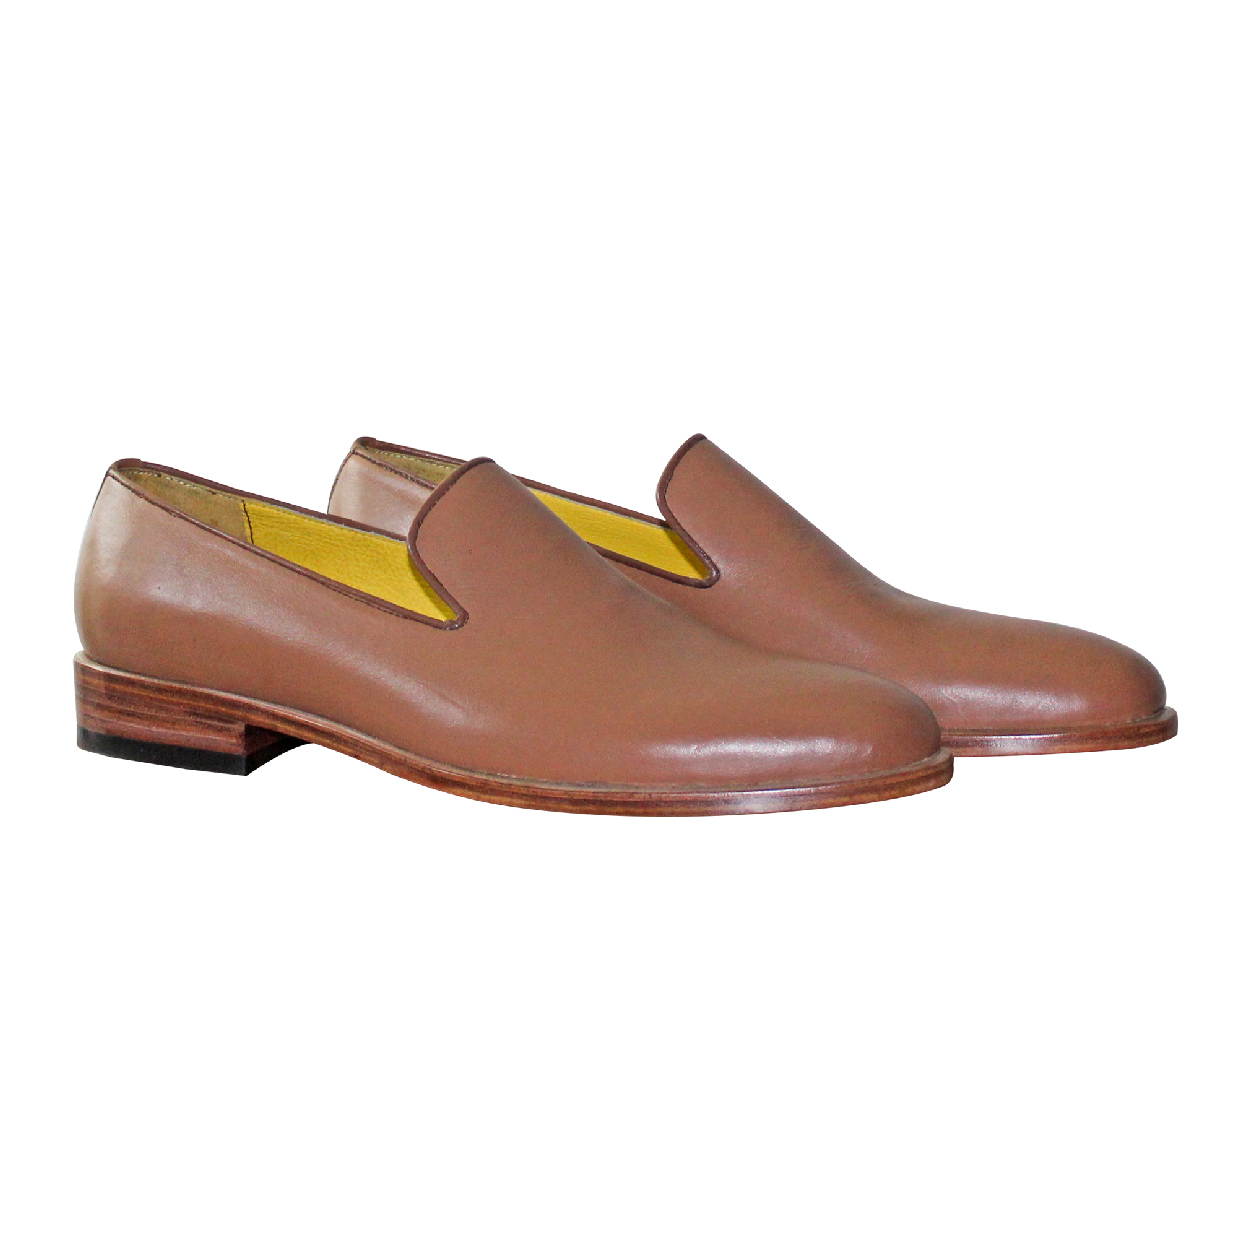 Primary image for Handmade Men's Brown Leather Slip Ons Loafer Shoes